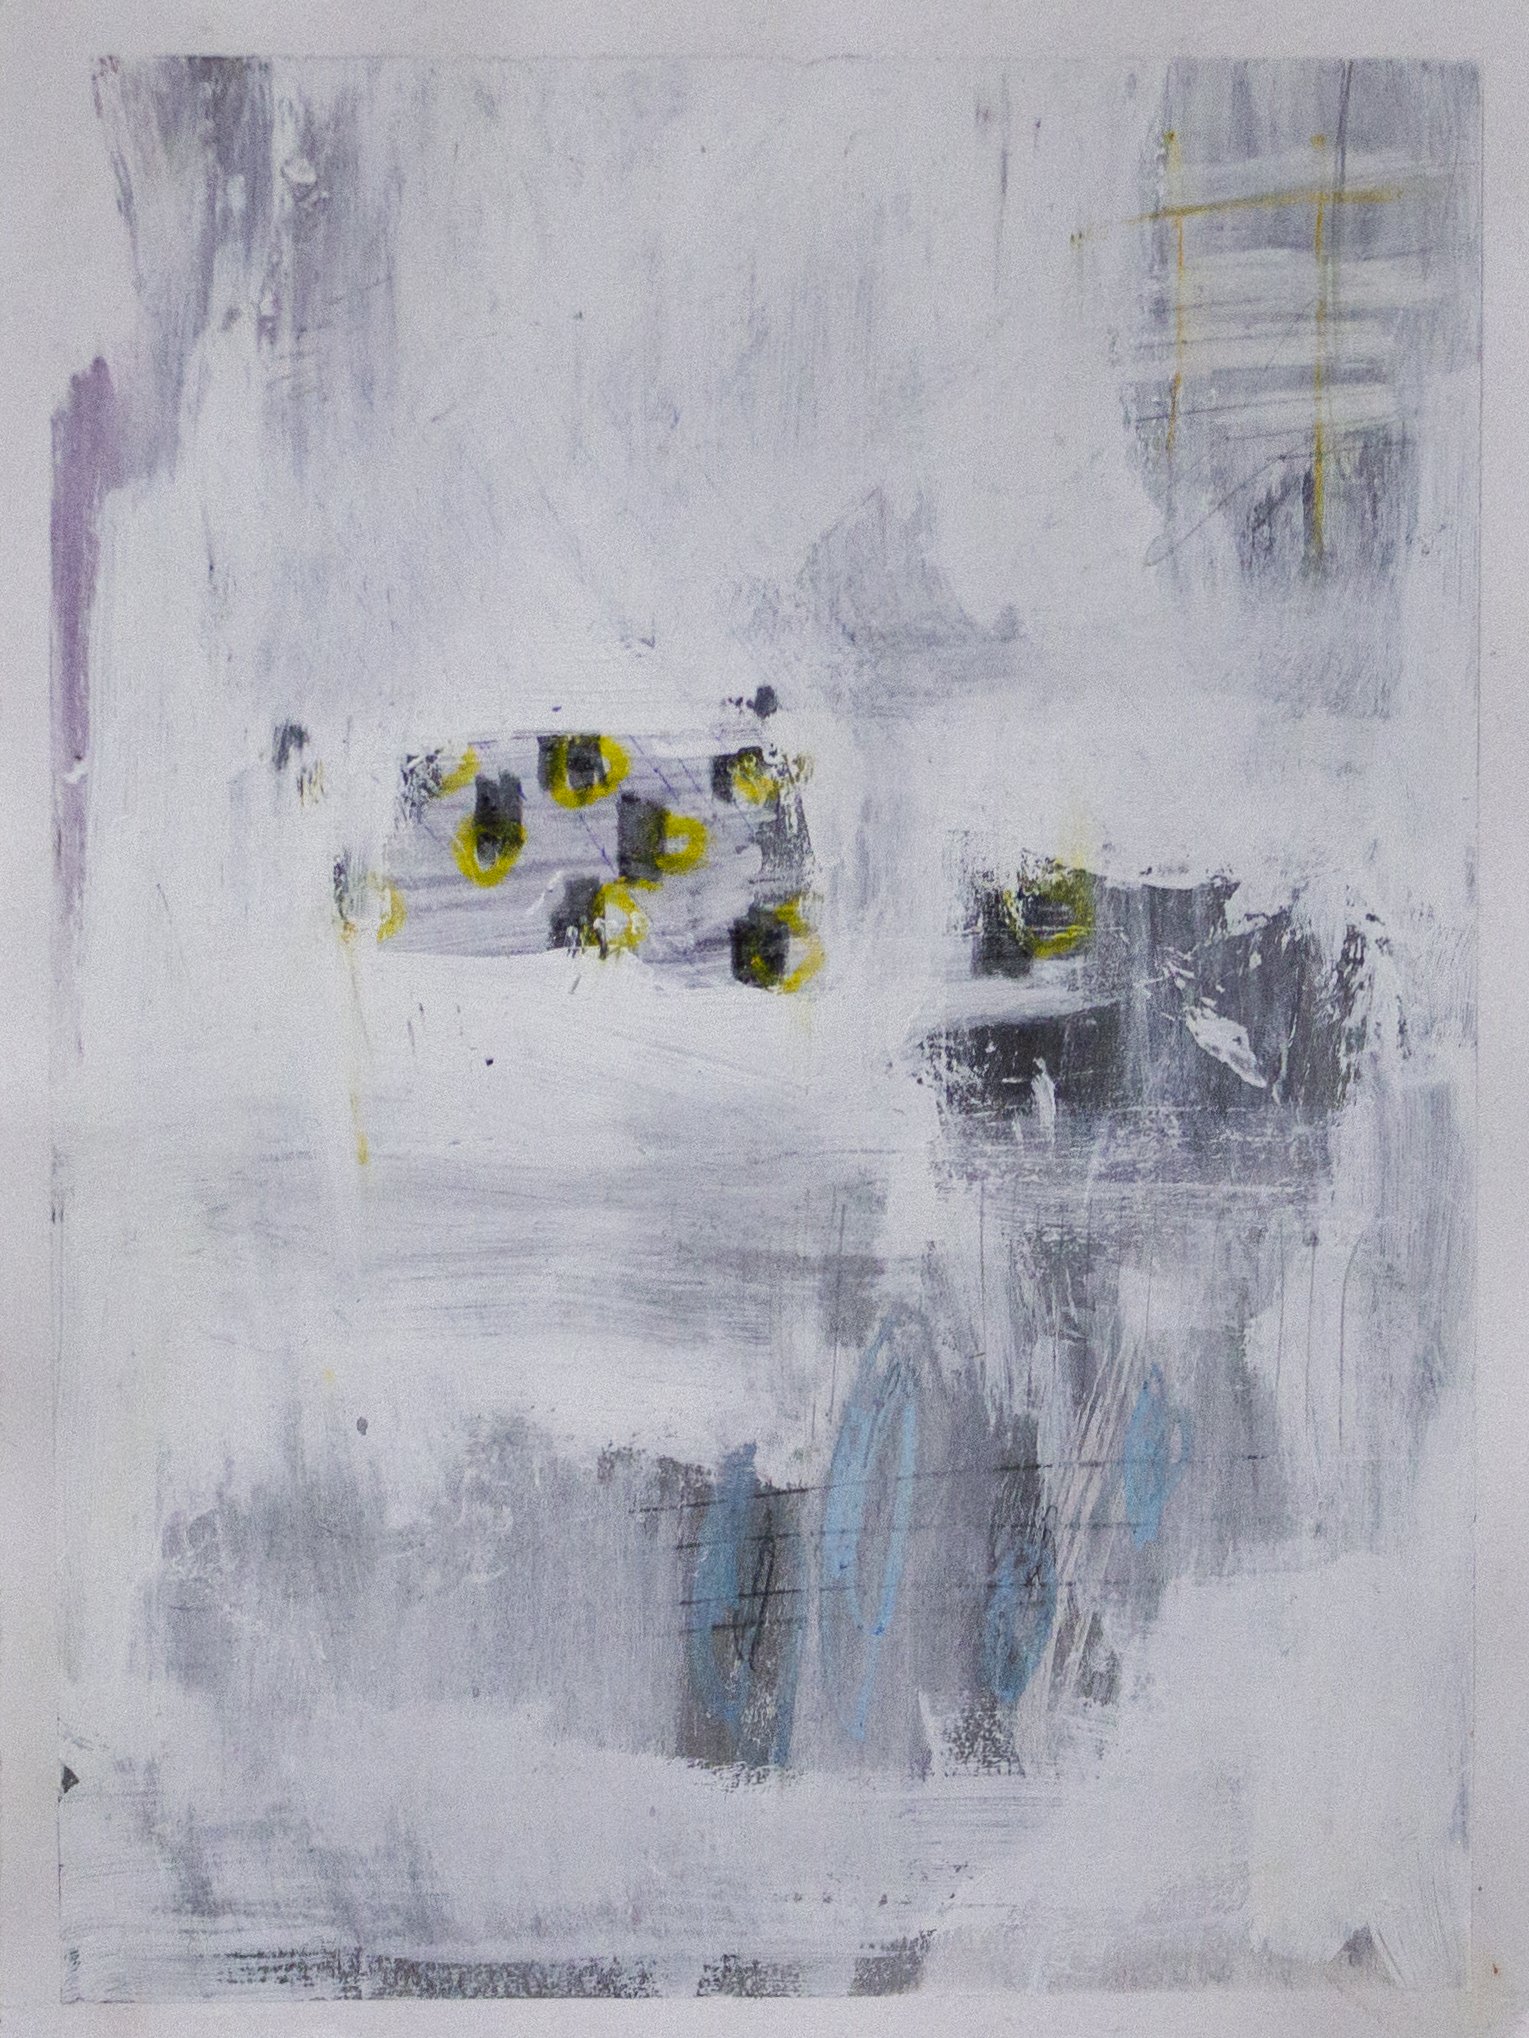   The Music of Melancholy , 2022  9 x 12 inches  Acrylic, Crayon, Pastel and Pencil on Paper 